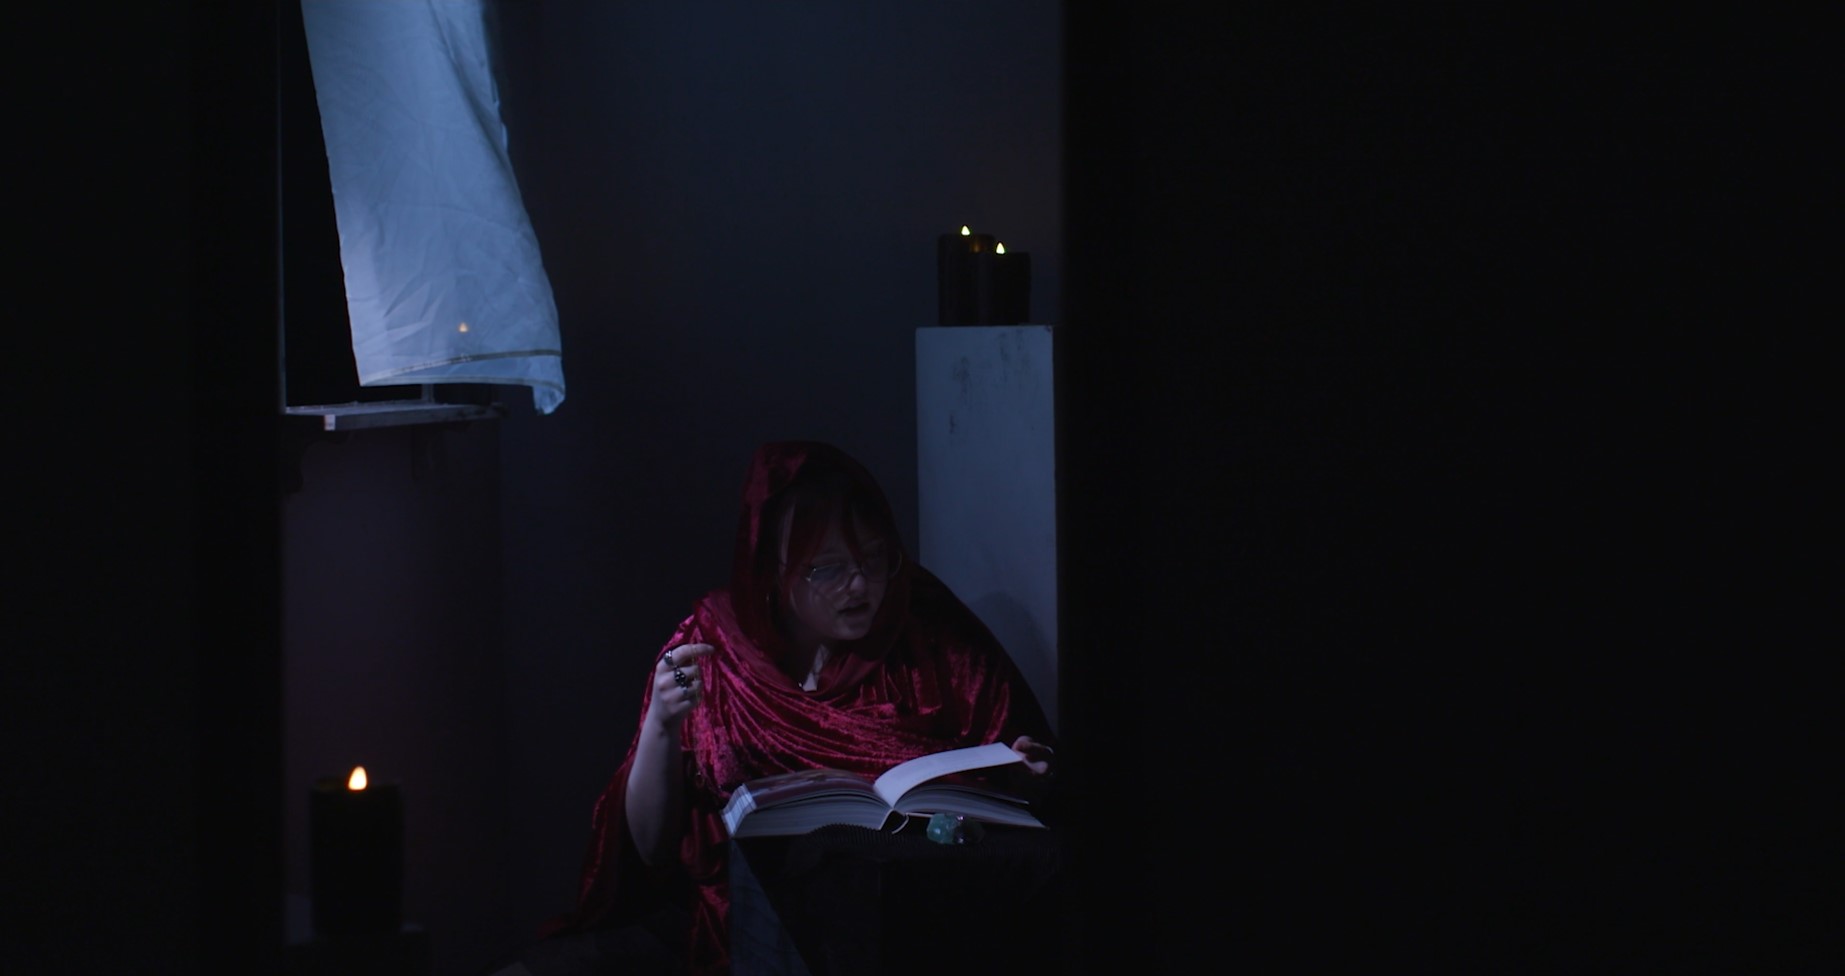 Image link to graduate showreel by Abi Plant showing a collection of short clips from our production design work. Image shows a character in a red robe reading a book in a dark room